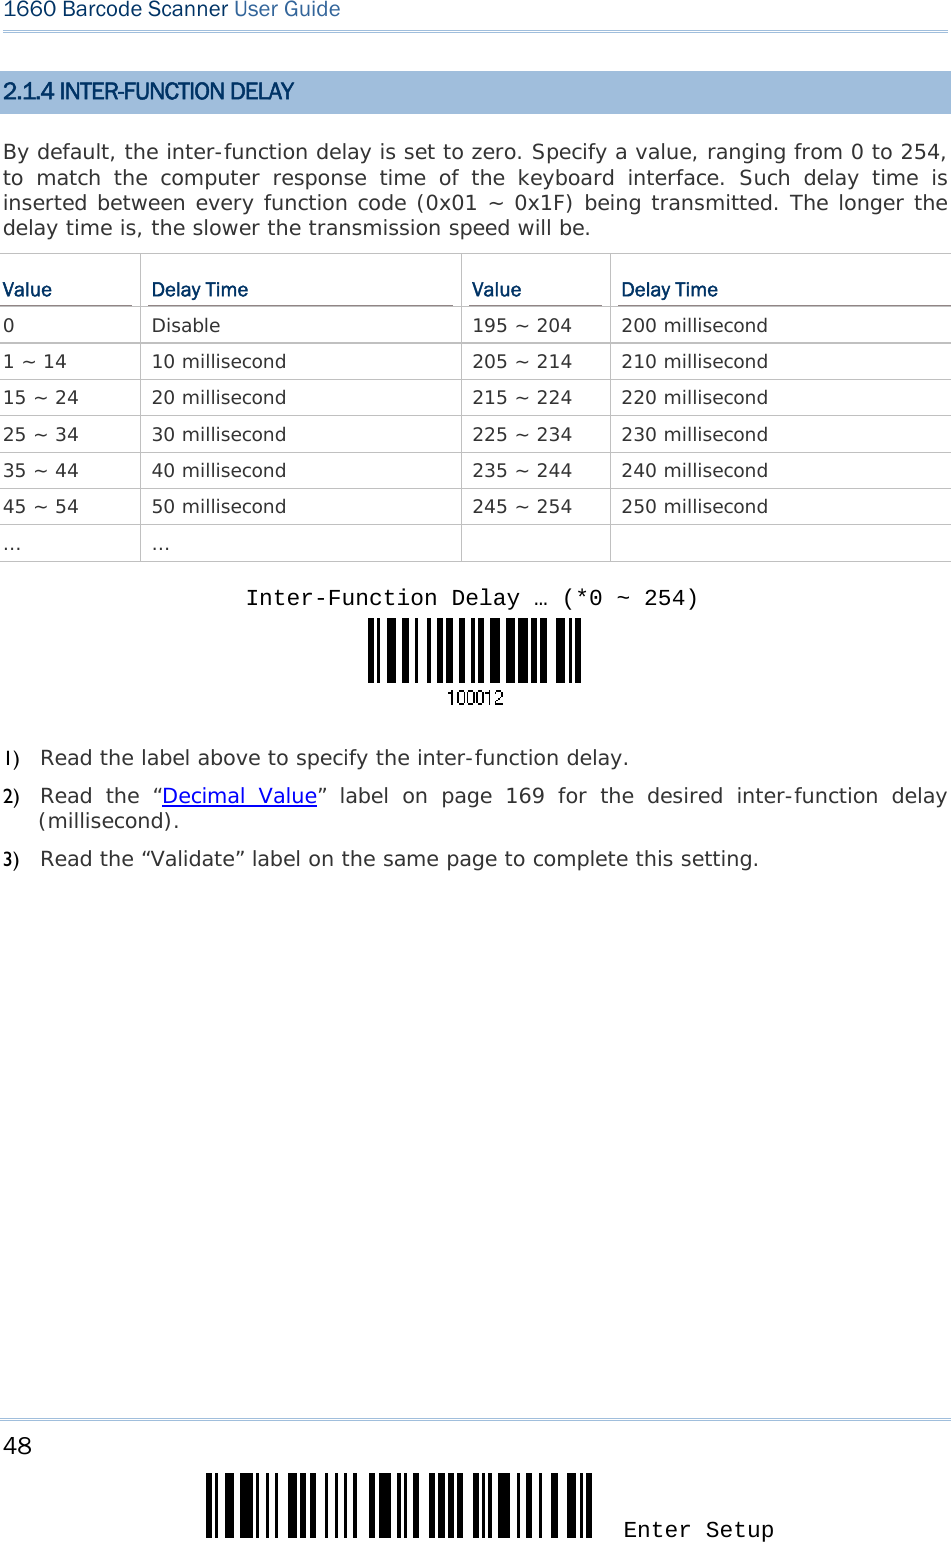 48 Enter Setup 1660 Barcode Scanner User Guide  2.1.4 INTER-FUNCTION DELAY By default, the inter-function delay is set to zero. Specify a value, ranging from 0 to 254, to match the computer response time of the keyboard interface. Such delay time is inserted between every function code (0x01 ~ 0x1F) being transmitted. The longer the delay time is, the slower the transmission speed will be. Value  Delay Time  Value  Delay Time 0  Disable  195 ~ 204  200 millisecond 1 ~ 14  10 millisecond  205 ~ 214  210 millisecond 15 ~ 24  20 millisecond  215 ~ 224  220 millisecond 25 ~ 34  30 millisecond  225 ~ 234  230 millisecond 35 ~ 44  40 millisecond  235 ~ 244  240 millisecond 45 ~ 54  50 millisecond  245 ~ 254  250 millisecond … …        1) Read the label above to specify the inter-function delay.       2) Read the “Decimal Value” label on page 169 for the desired inter-function delay (millisecond).  3) Read the “Validate” label on the same page to complete this setting.    Inter-Function Delay … (*0 ~ 254)